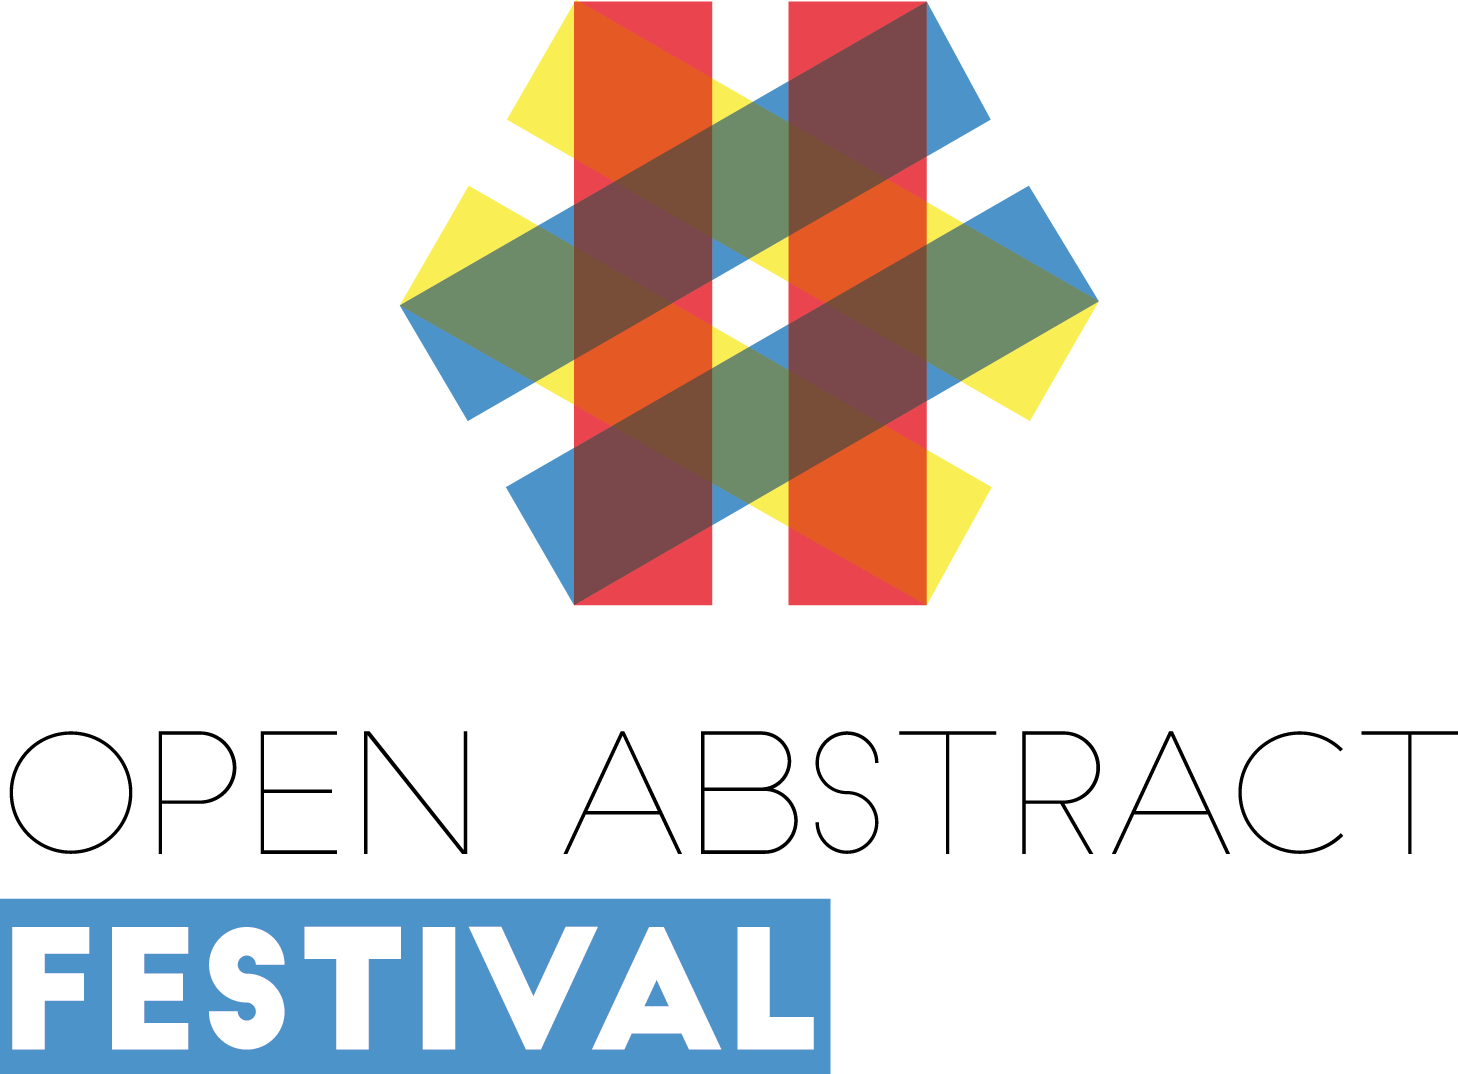 OPEN ABSTRACT FESTIVAL